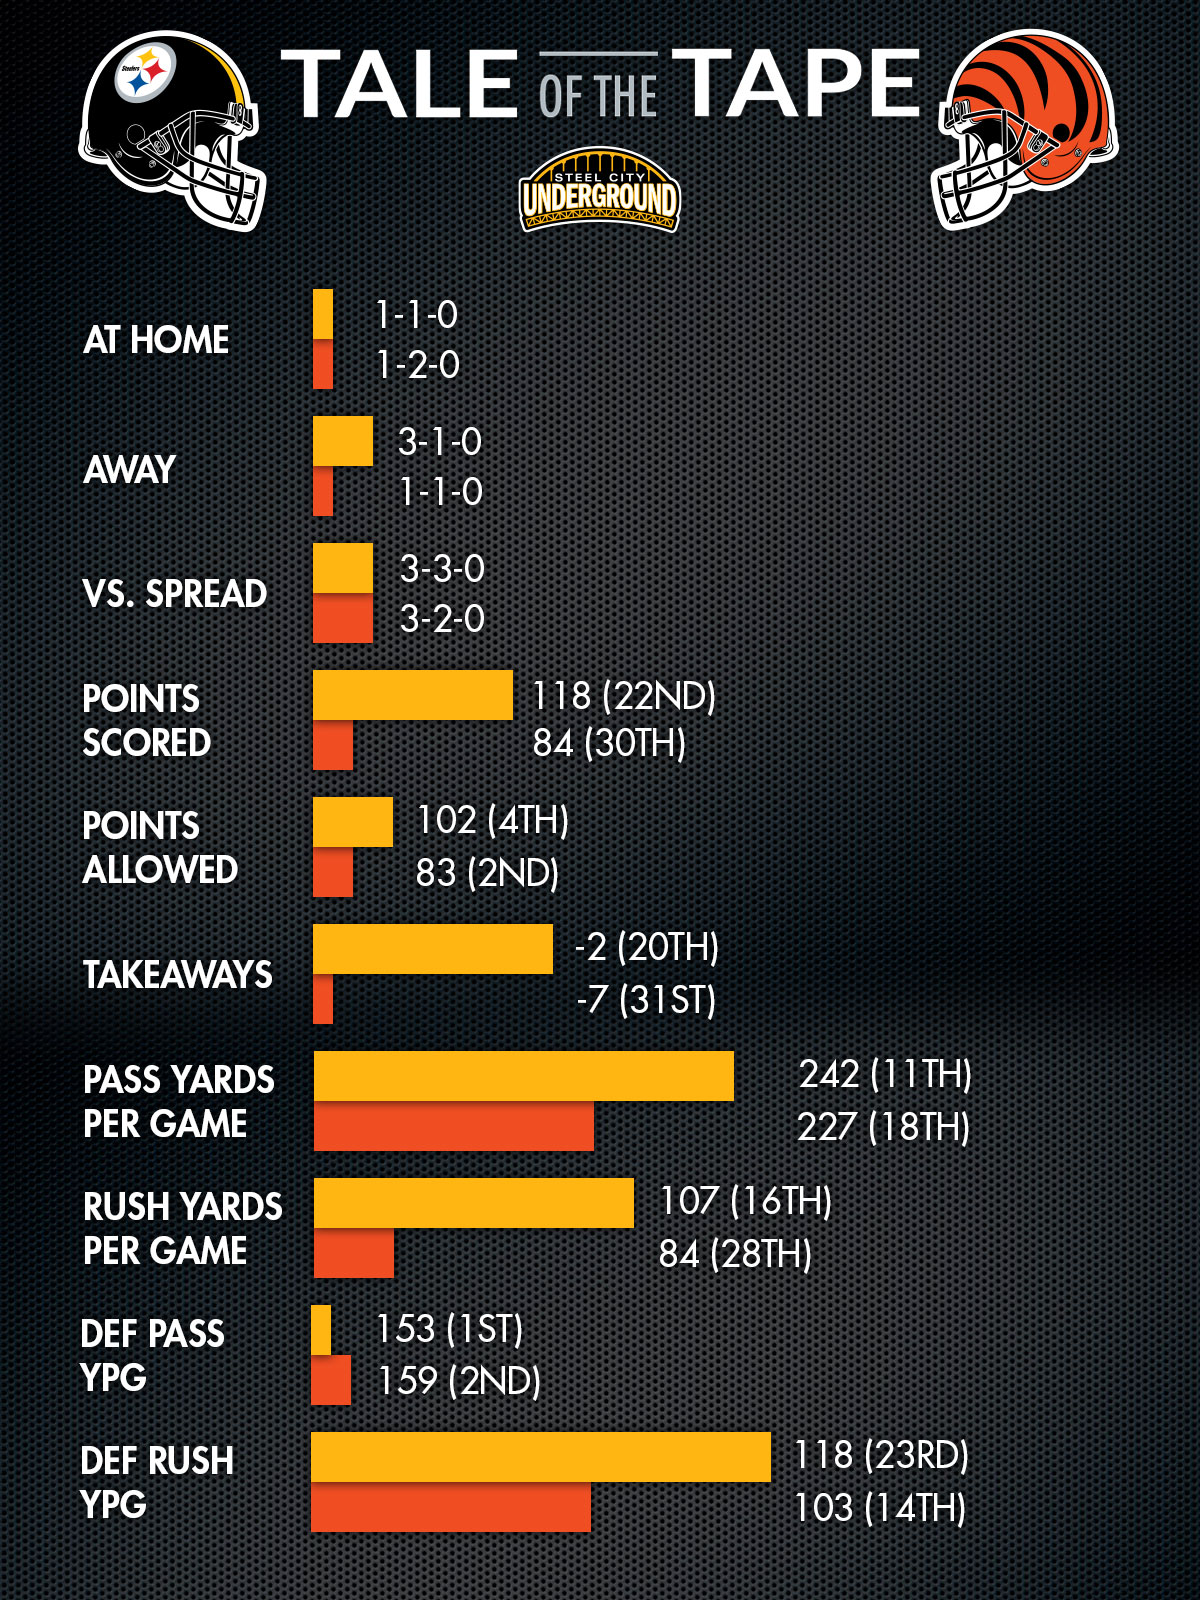 Steelers Bengals Tale of the Tape